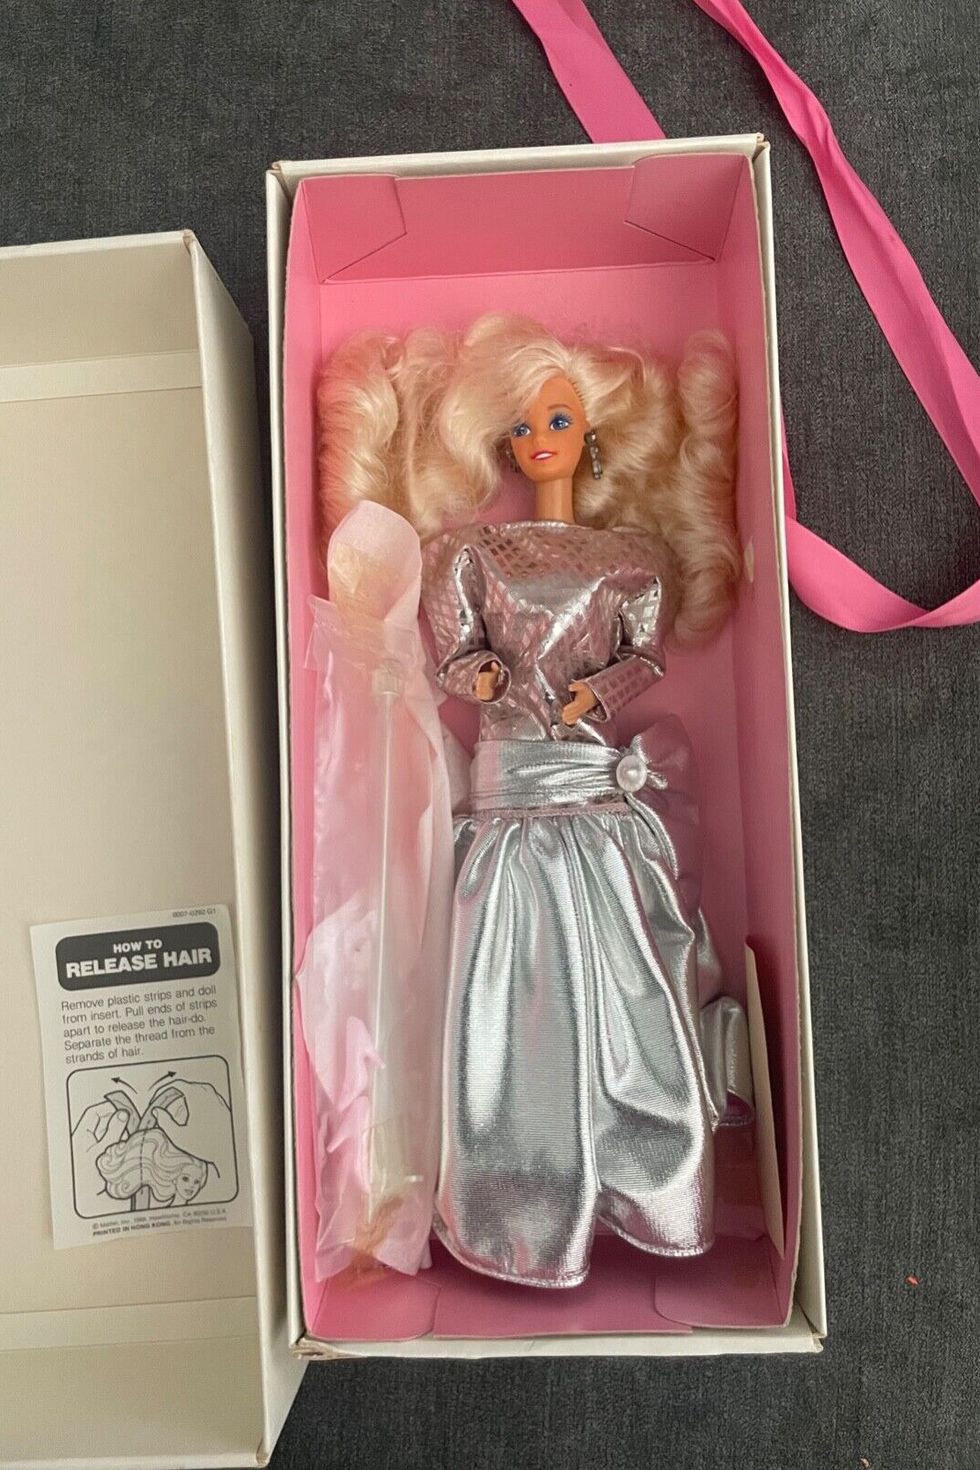 One of the rarest Barbie dolls in the world comes to Norfolk